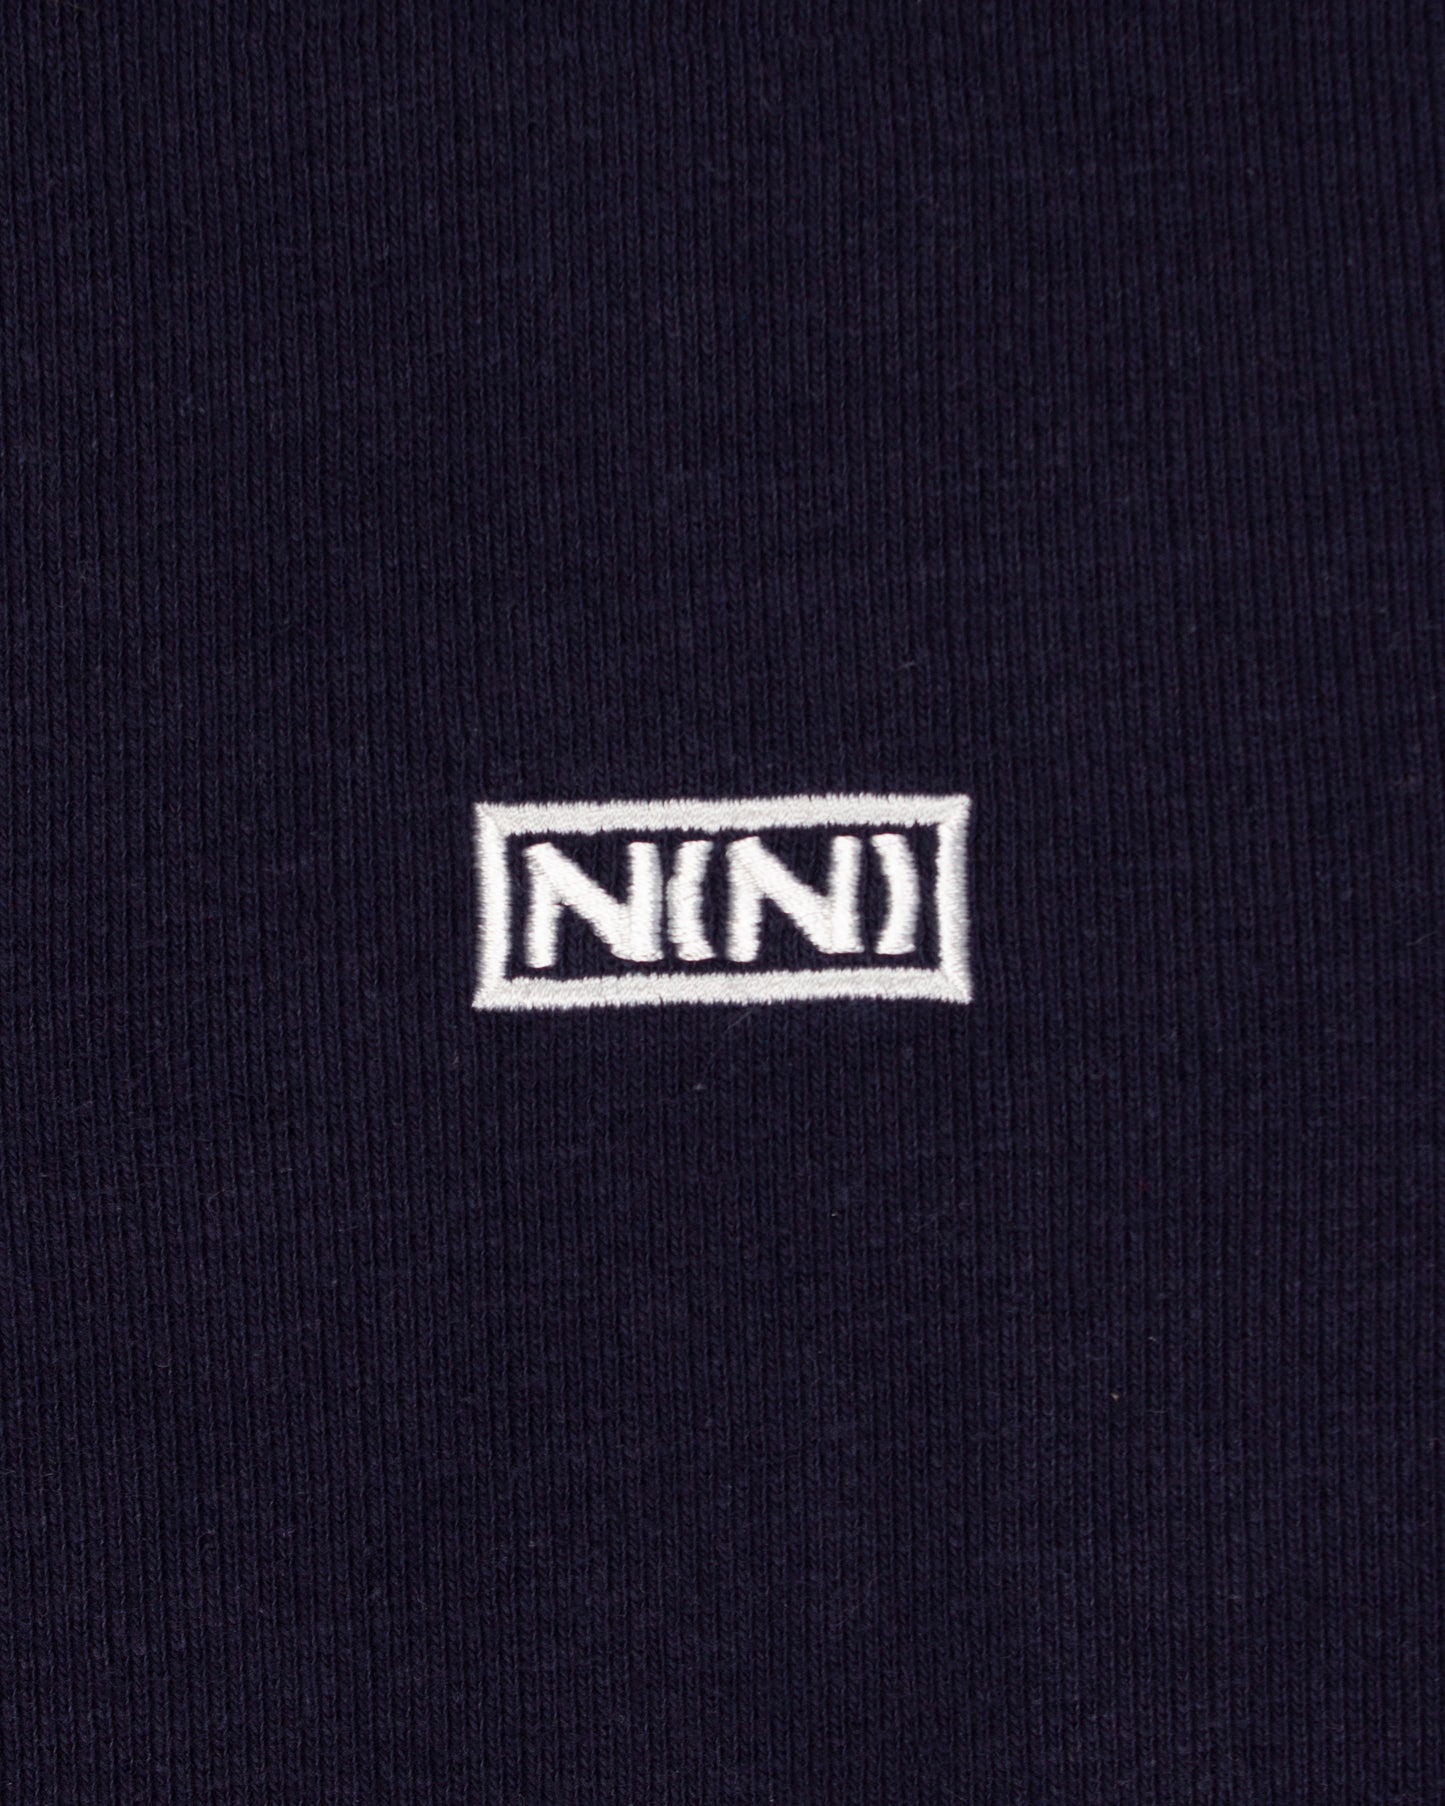 N(N) Embroided Shotrsleeve Jersey